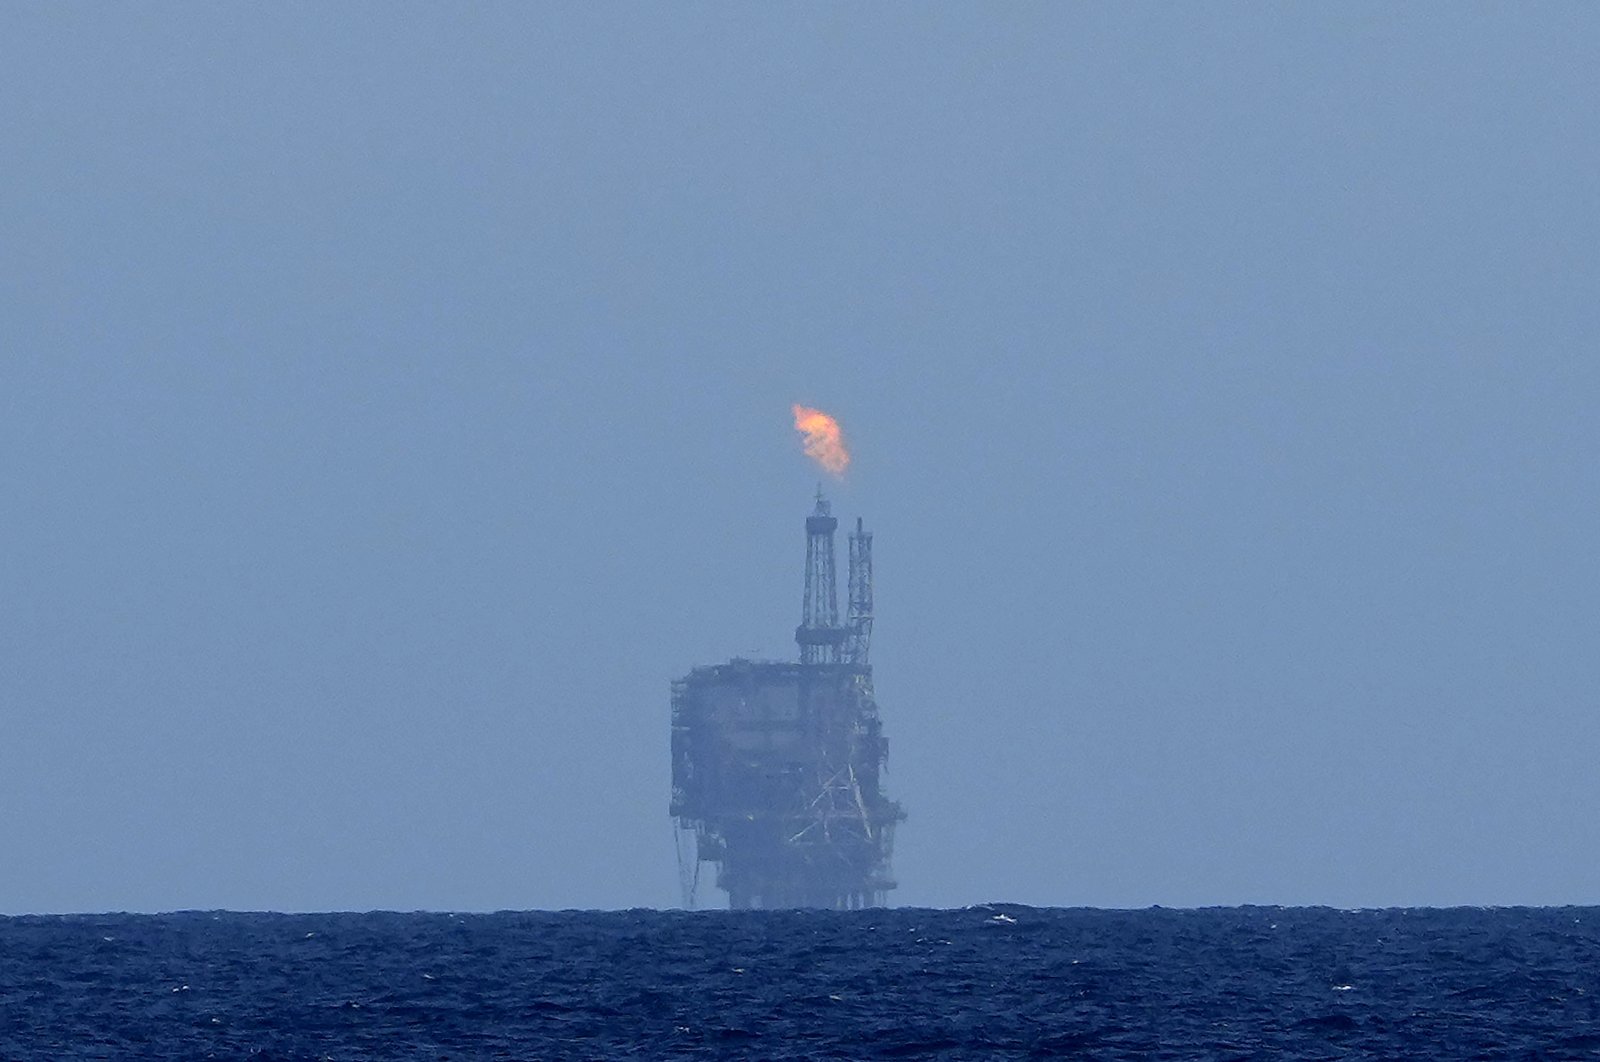 An oil platform is visible on the horizon in the international waters zone near Libya in the Mediterranean Sea, Sept. 17, 2022. (AP Photo)